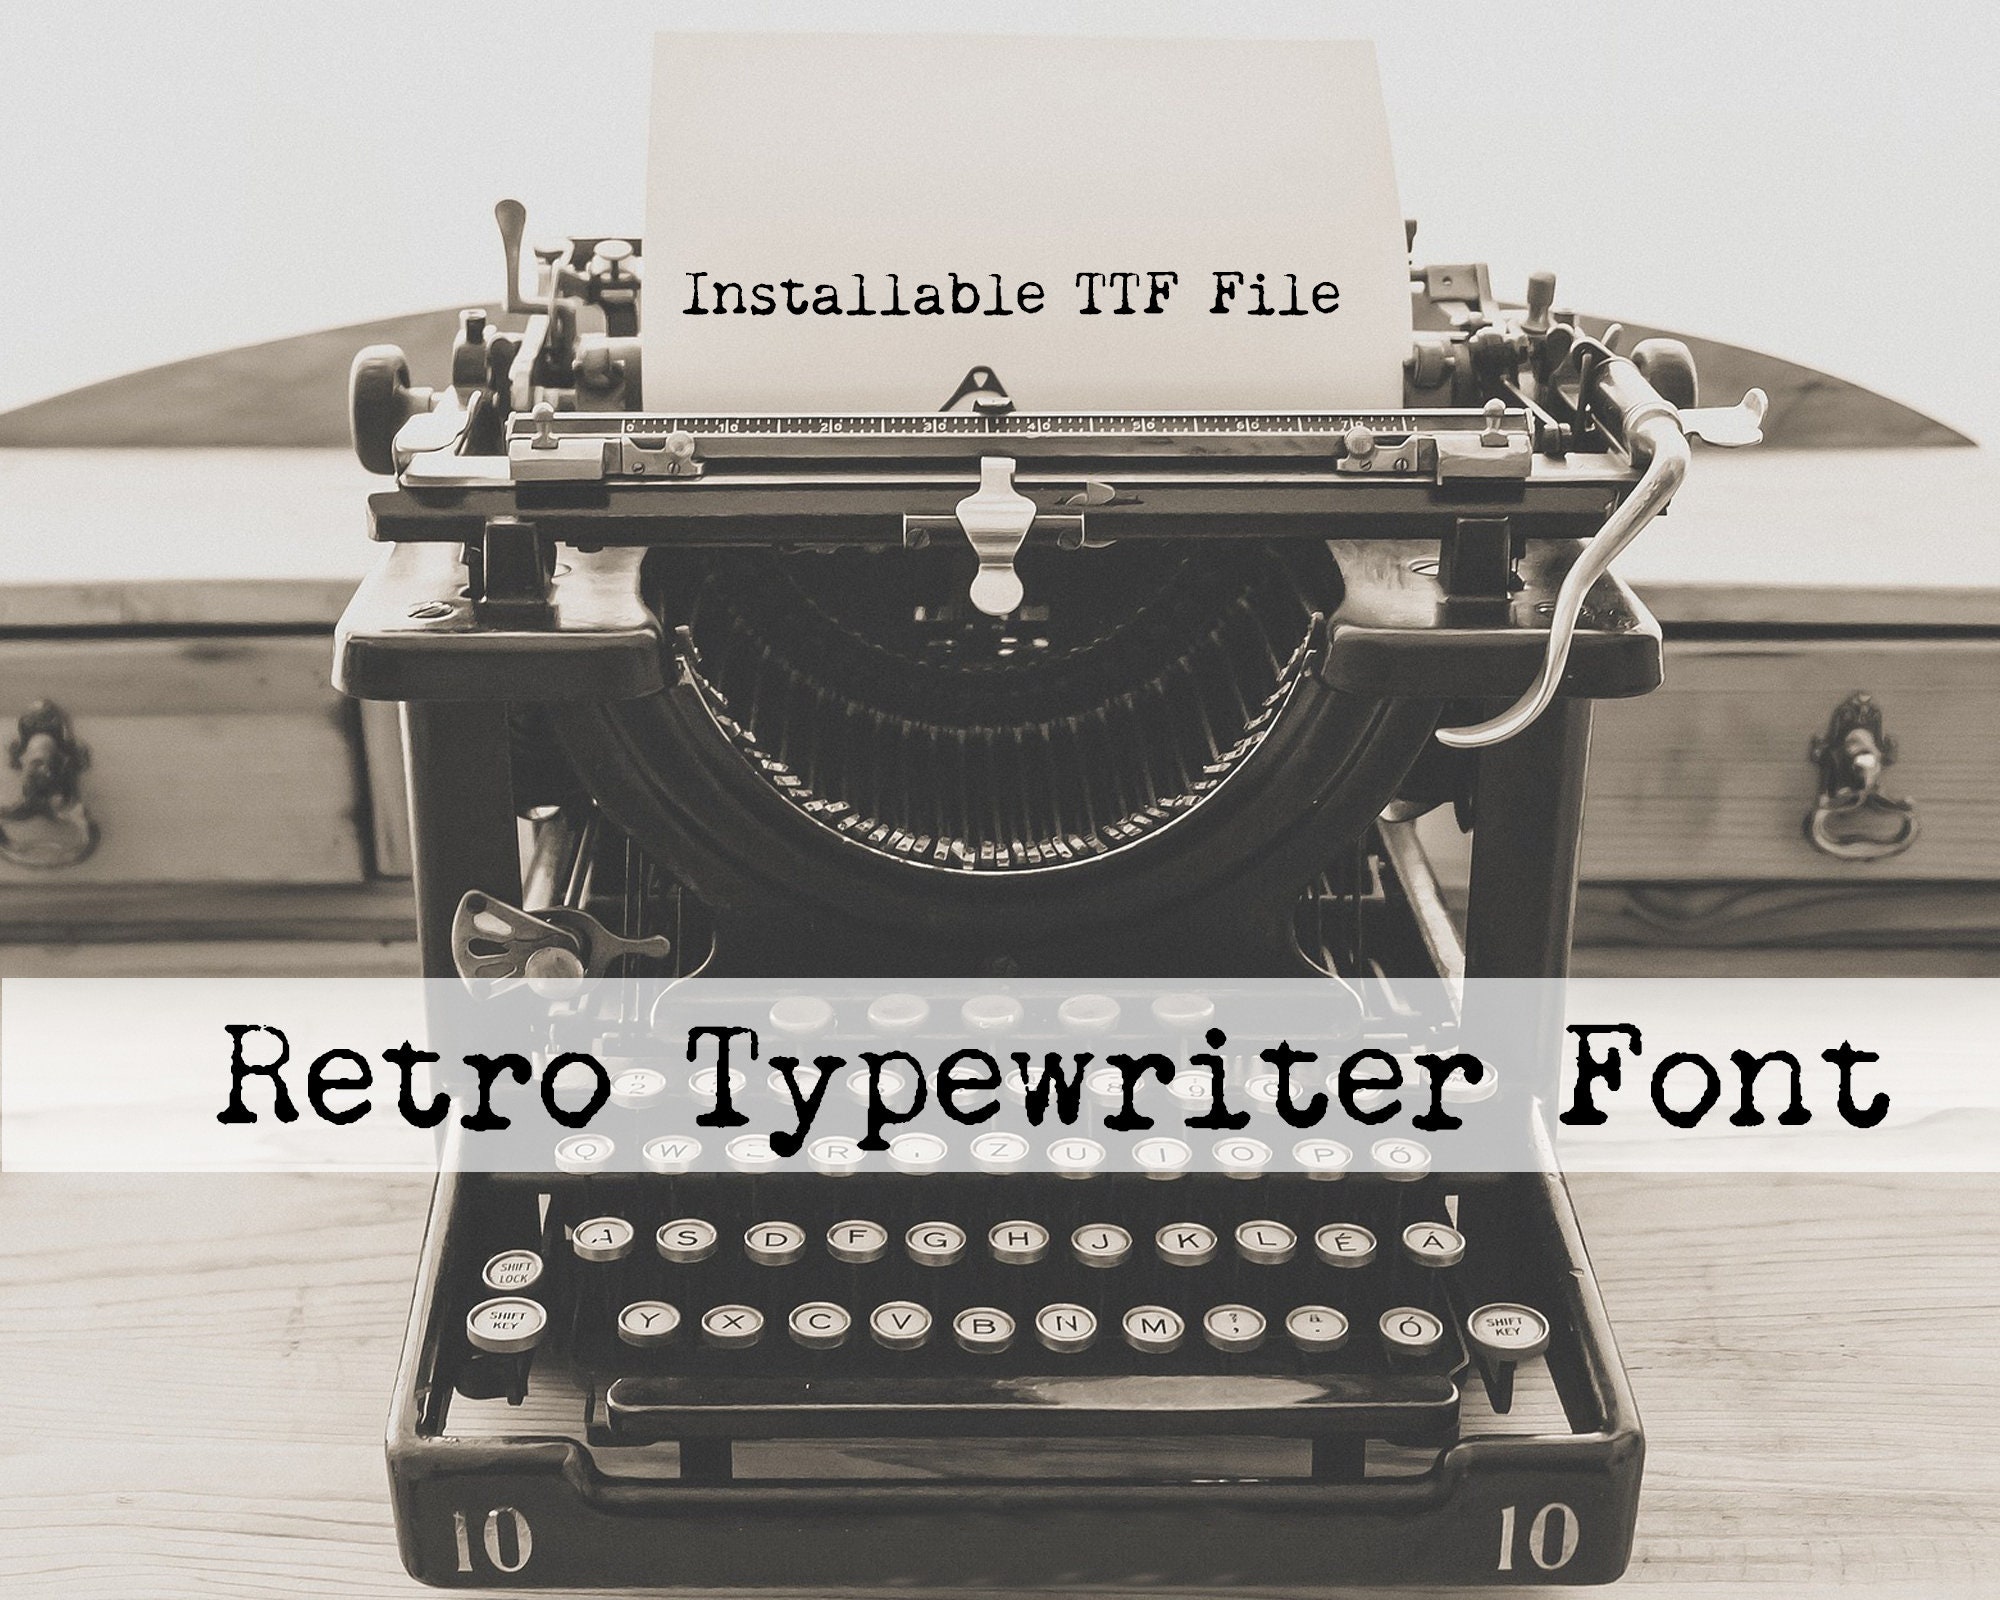  Retro Manual Typewriter - Old Fashioned Machinery Word  Processing Typewriter - Red Black Ribbon - Birthday Gift Display Decoration  - Normal use - Free Writing,White : Office Products